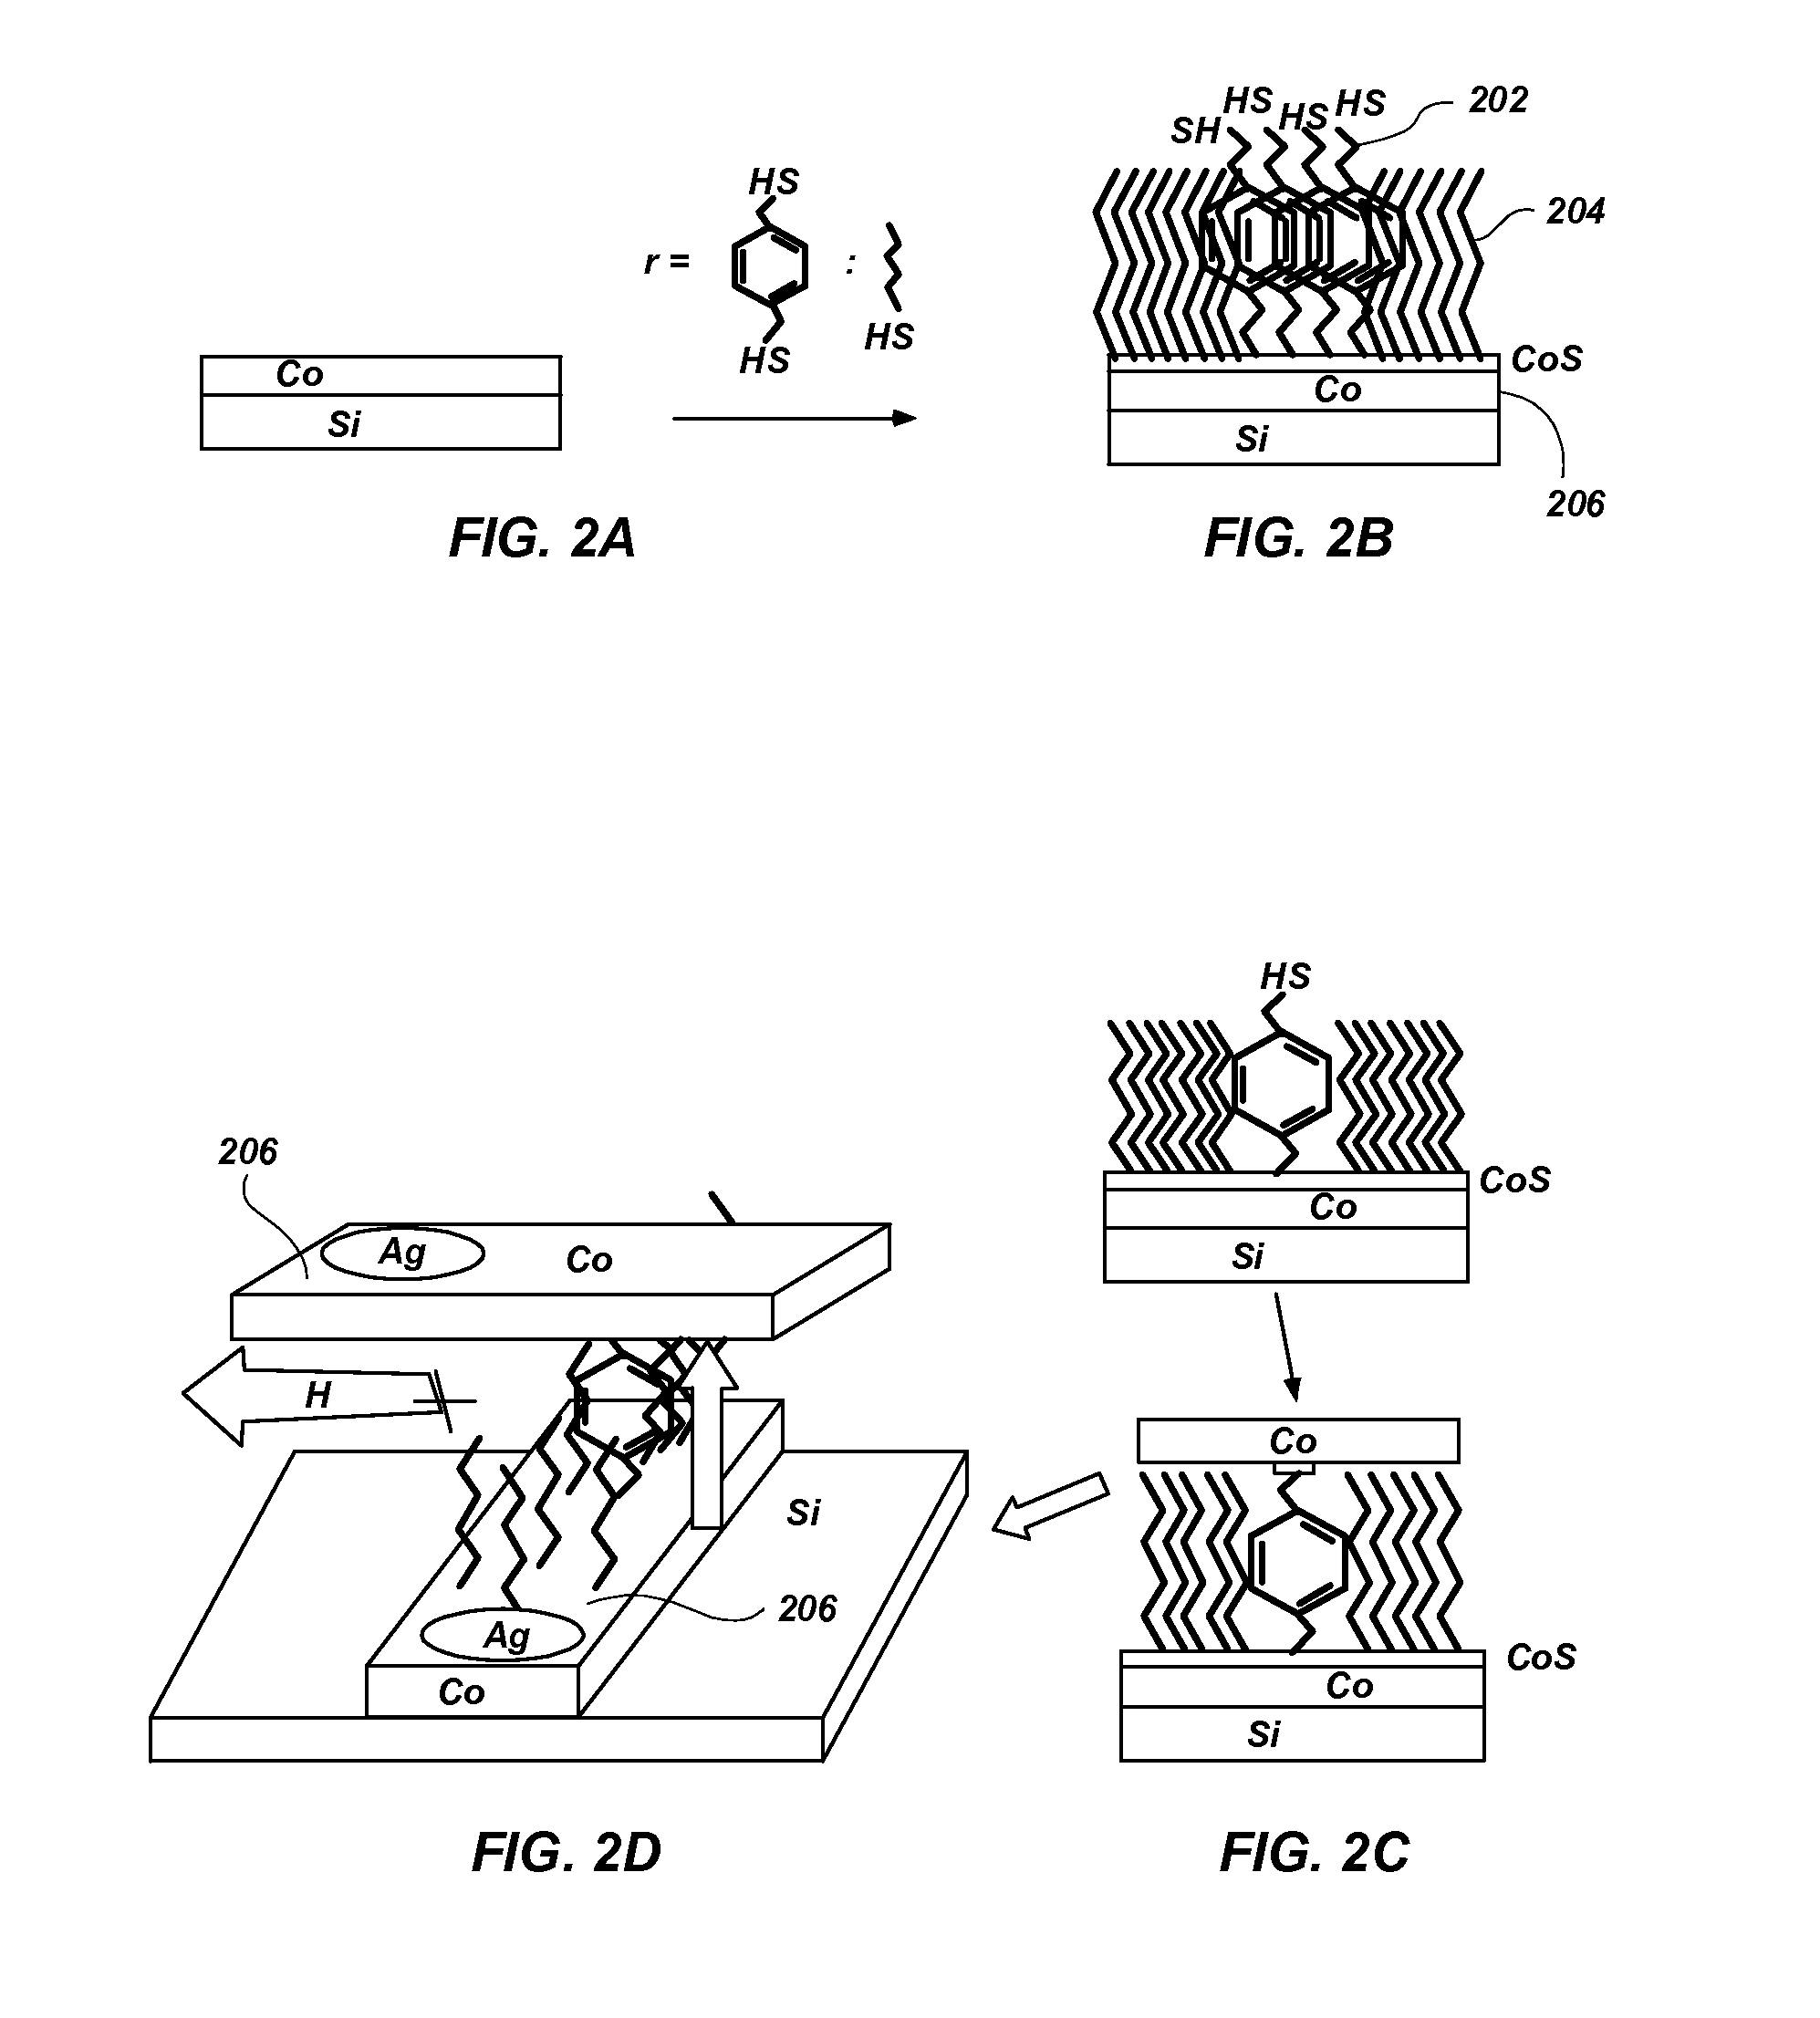 Method and Apparatus for Measuring Magnetic Fields